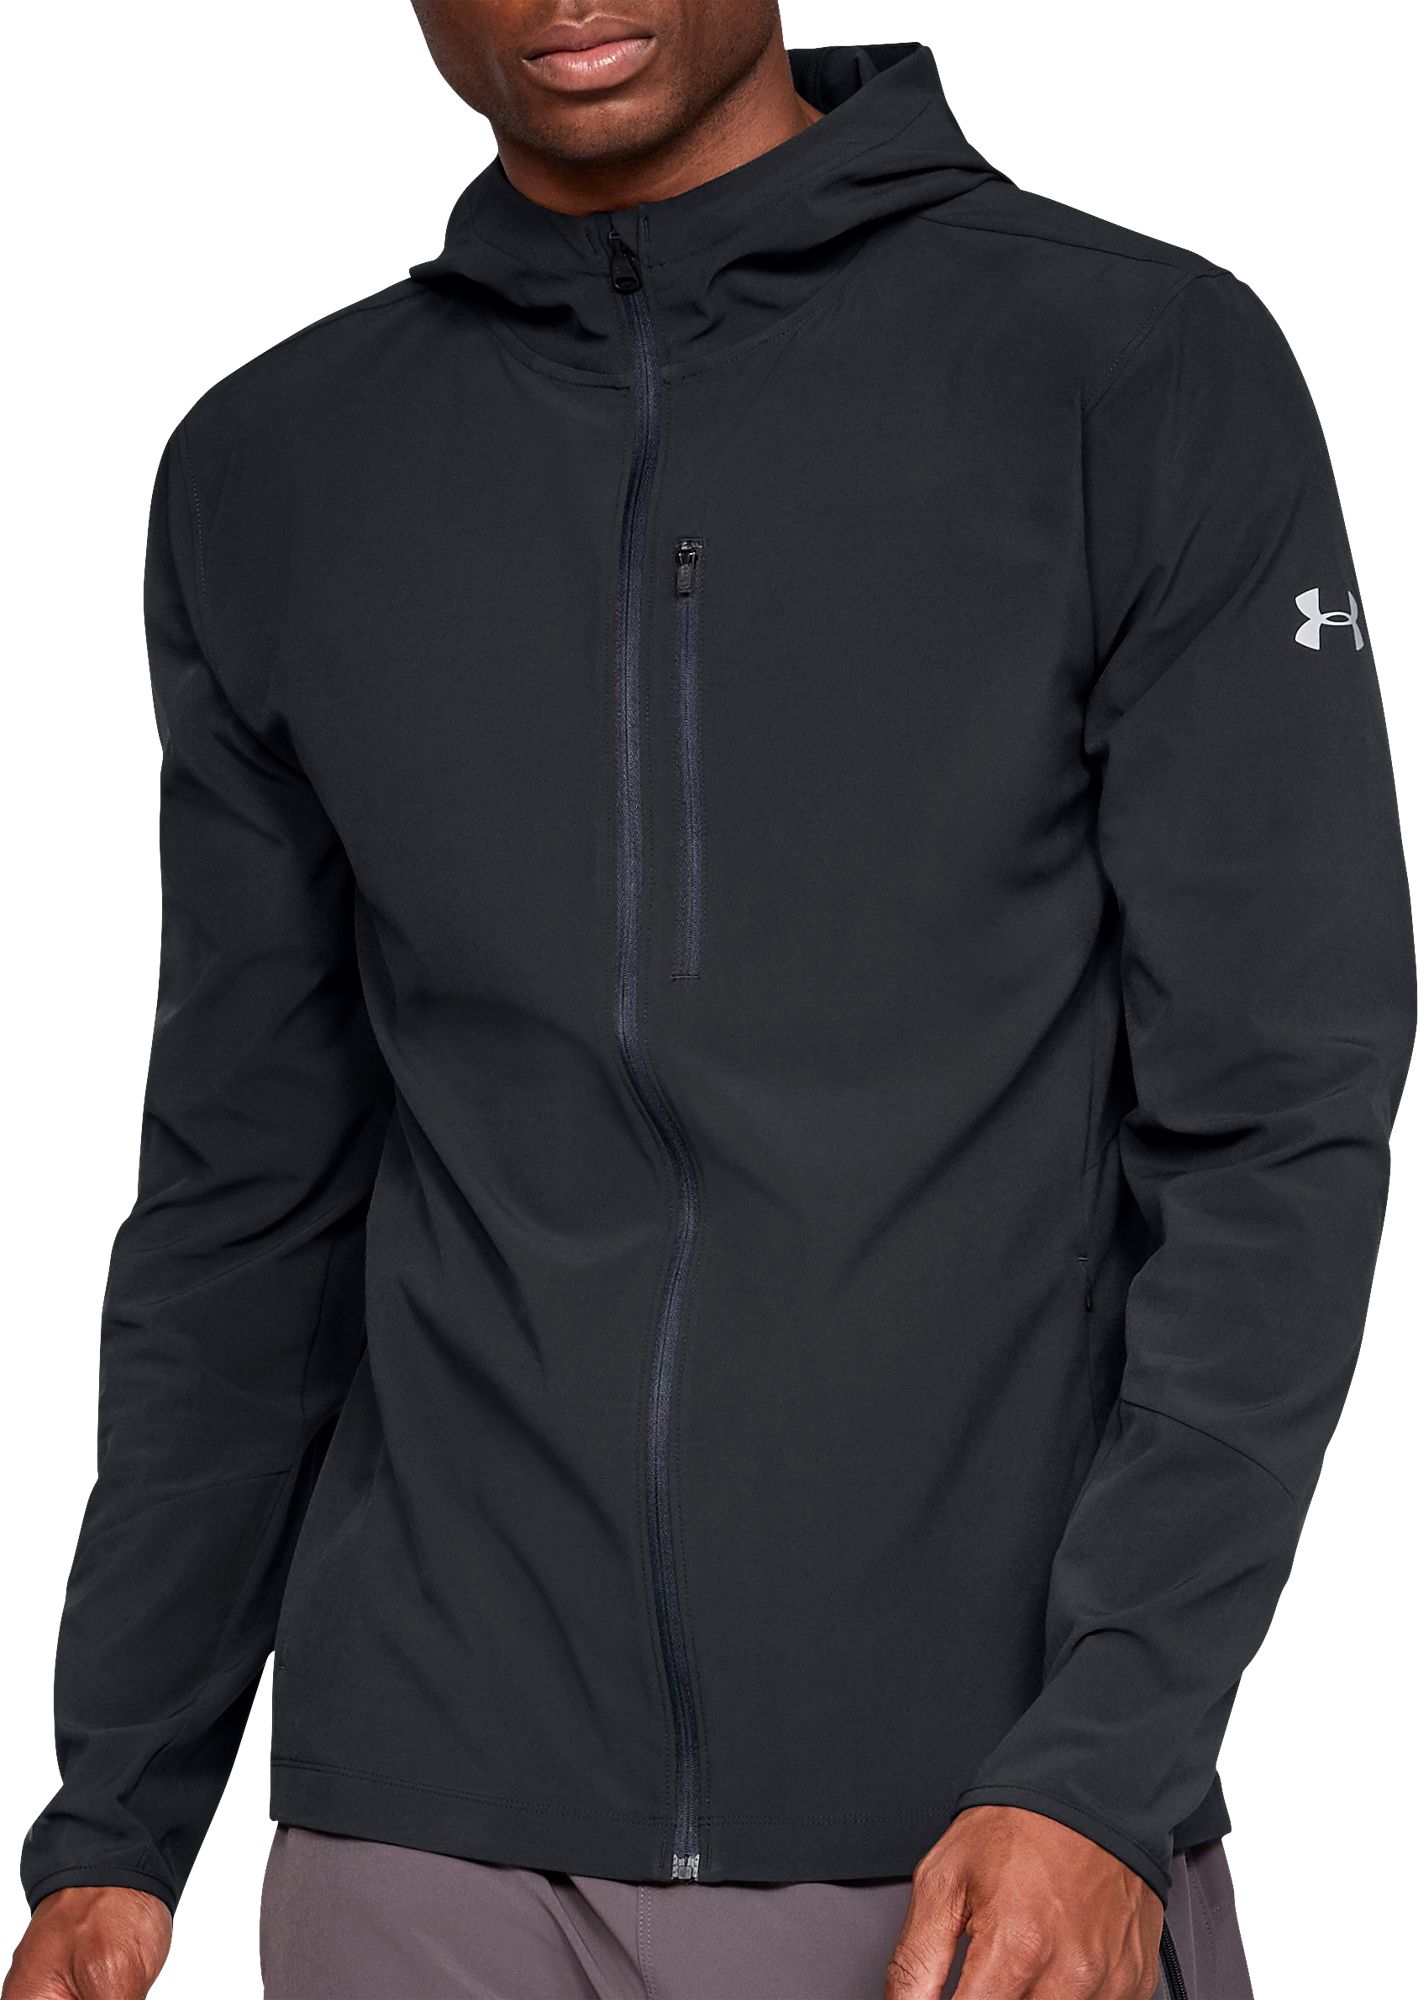 under armour storm 3 jacket review